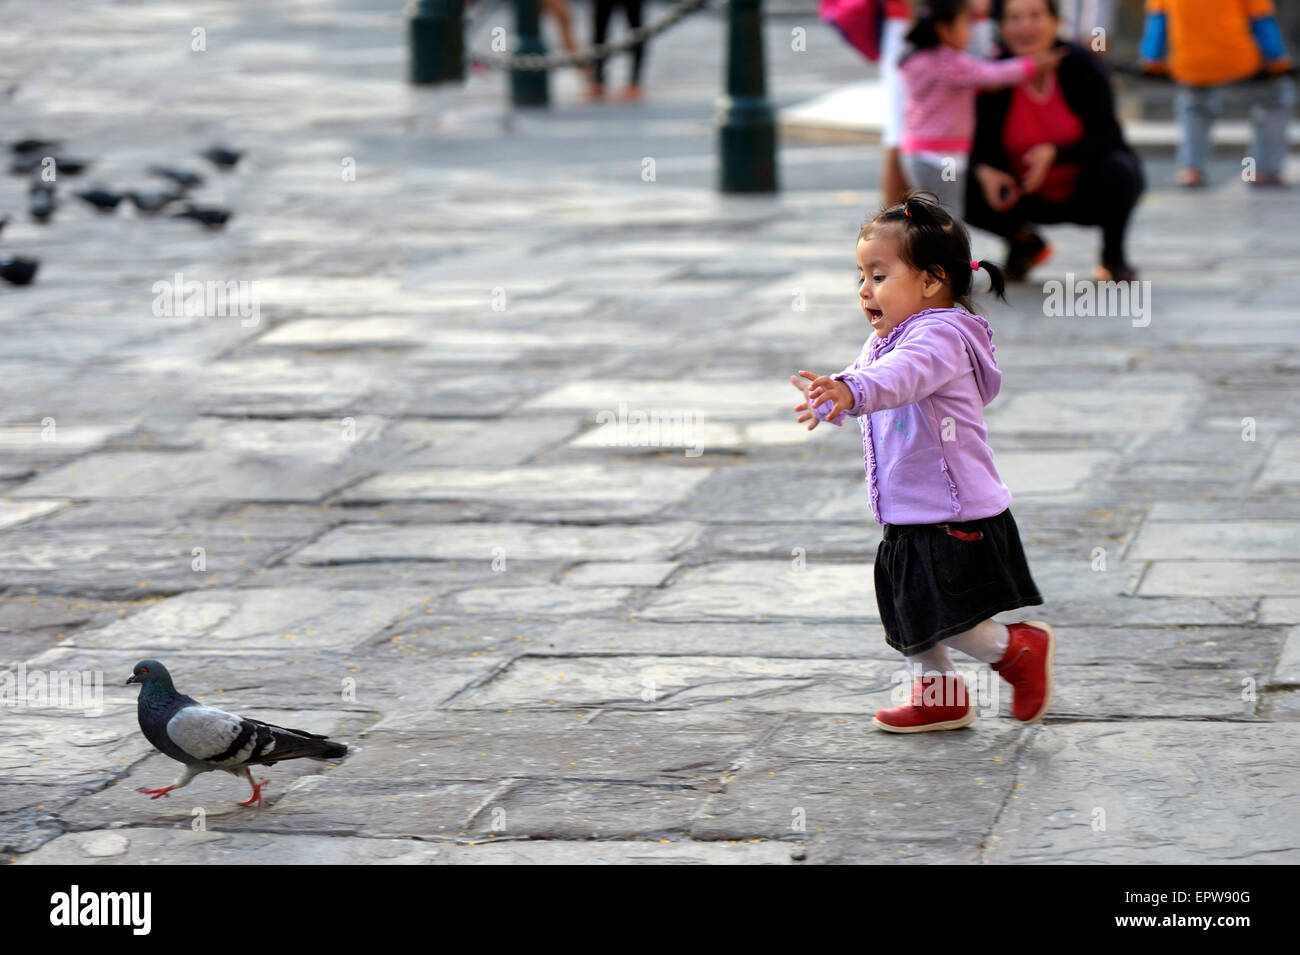 Girl chasing a pigeon on a square, Lima, Peru Stock Photo